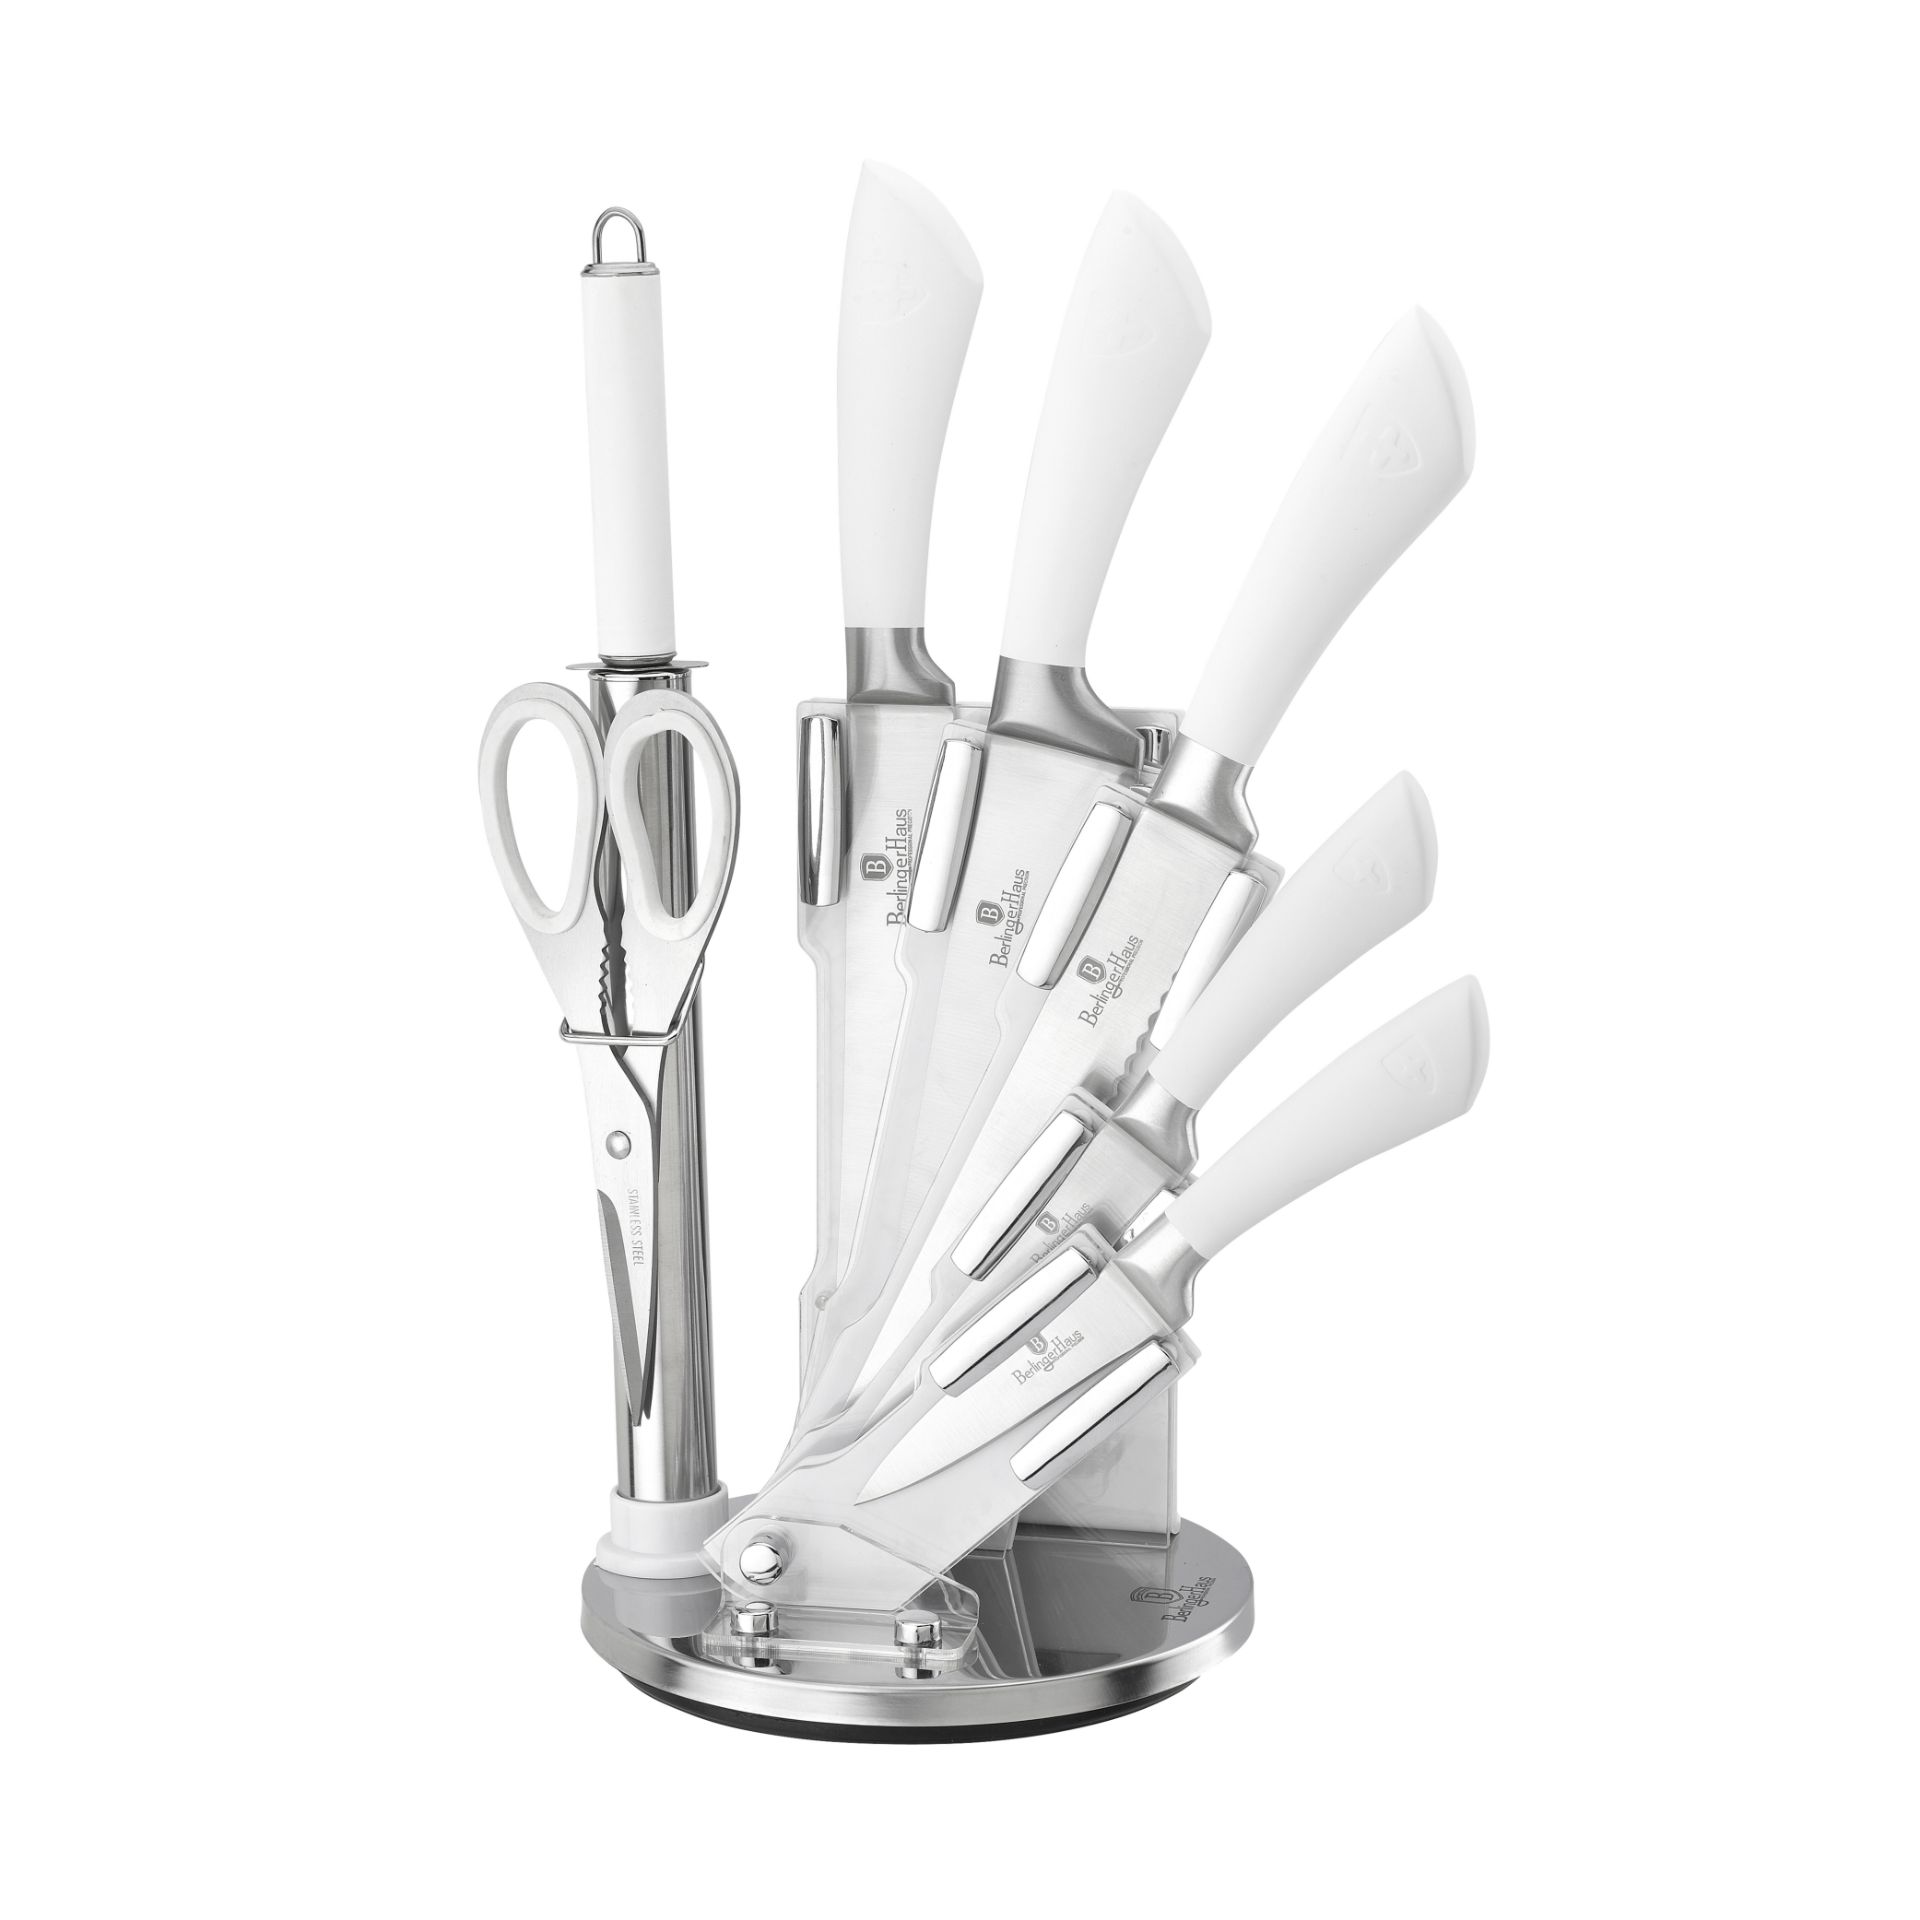 V Brand New Kitchen Line Switzerland 8 Piece Knife Set With Stand Includes 6.5" Cleaver/8" Chef